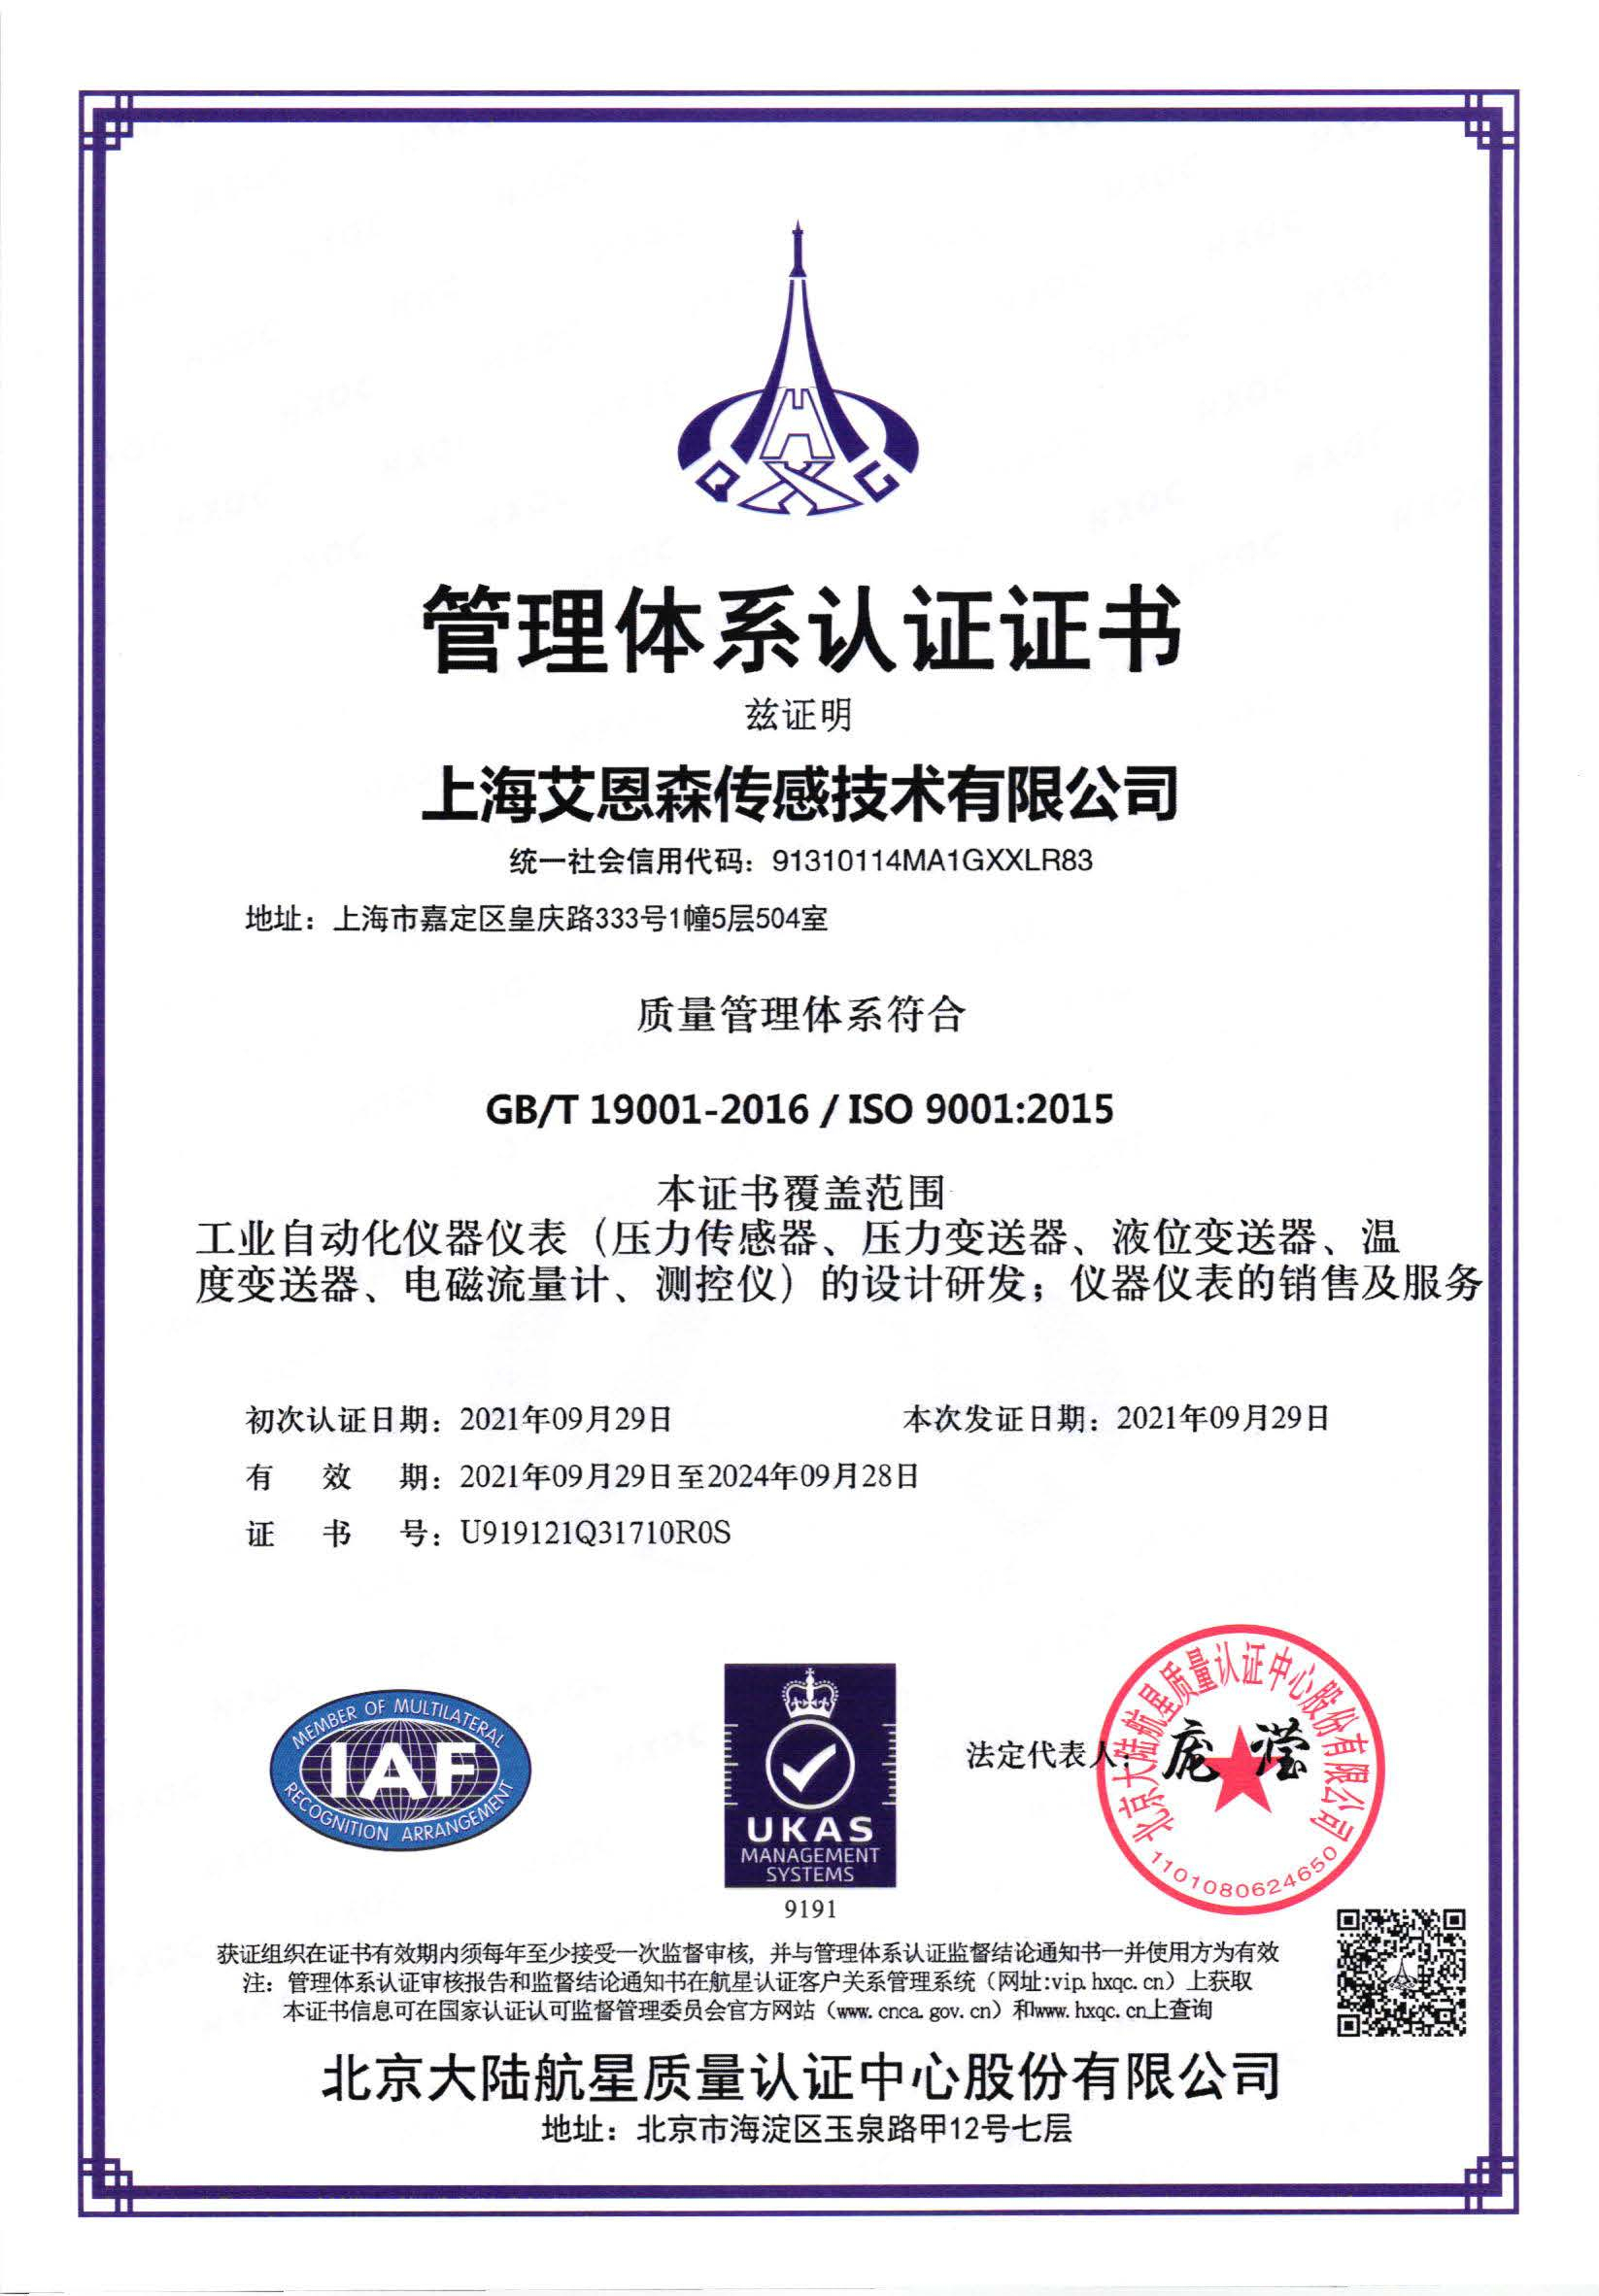 Management System Certification (Chinese)